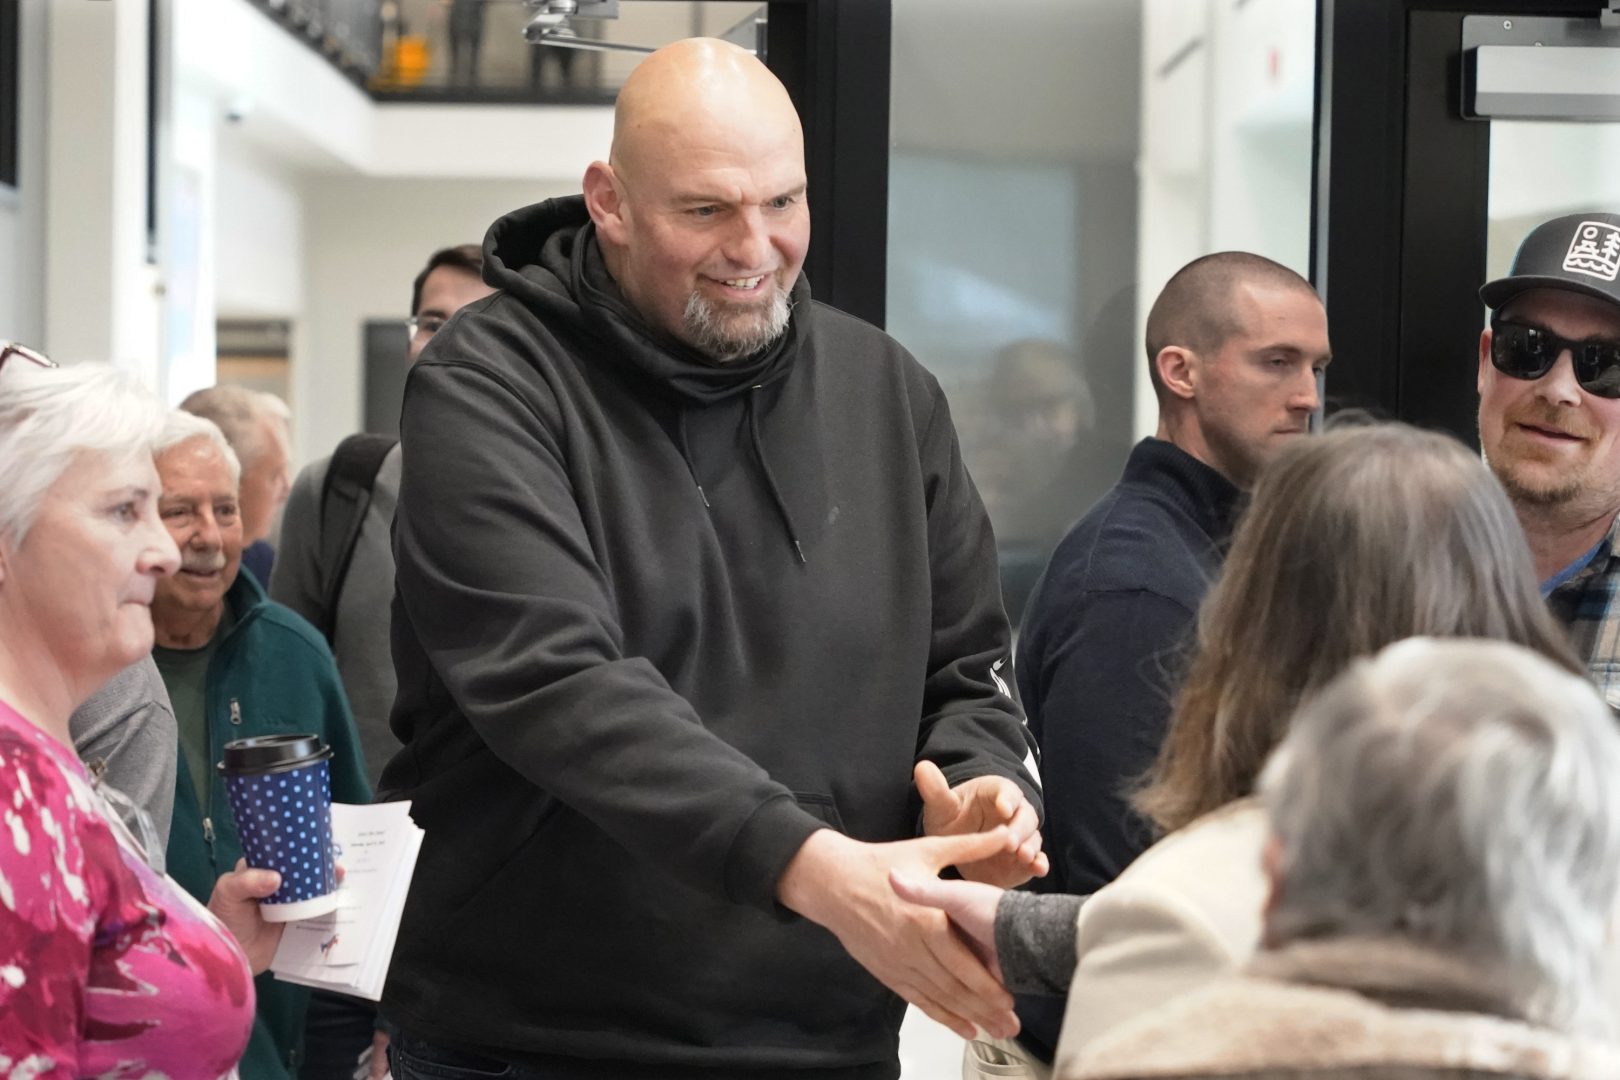 In this photo made on Friday, March 4, 2022, Pennsylvania Lt. Gov. John Fetterman, center, visits with people attending a Democratic Party event for candidates to meet and collect signatures for ballot petitions for the upcoming Pennsylvania primary election, at the Steamfitters Technology Center in Harmony, Pa. Fetterman is running for the party nomination for the U.S. Senate. The irreverent, blunt, 6 feet 8, tattooed Fetterman faces the Pennsylvania's Democratic Party committee backed U.S. Rep. Conor Lamb and Malcolm Kenyatta, a second-term state representative from Philadelphia. (AP Photo/Keith Srakocic)